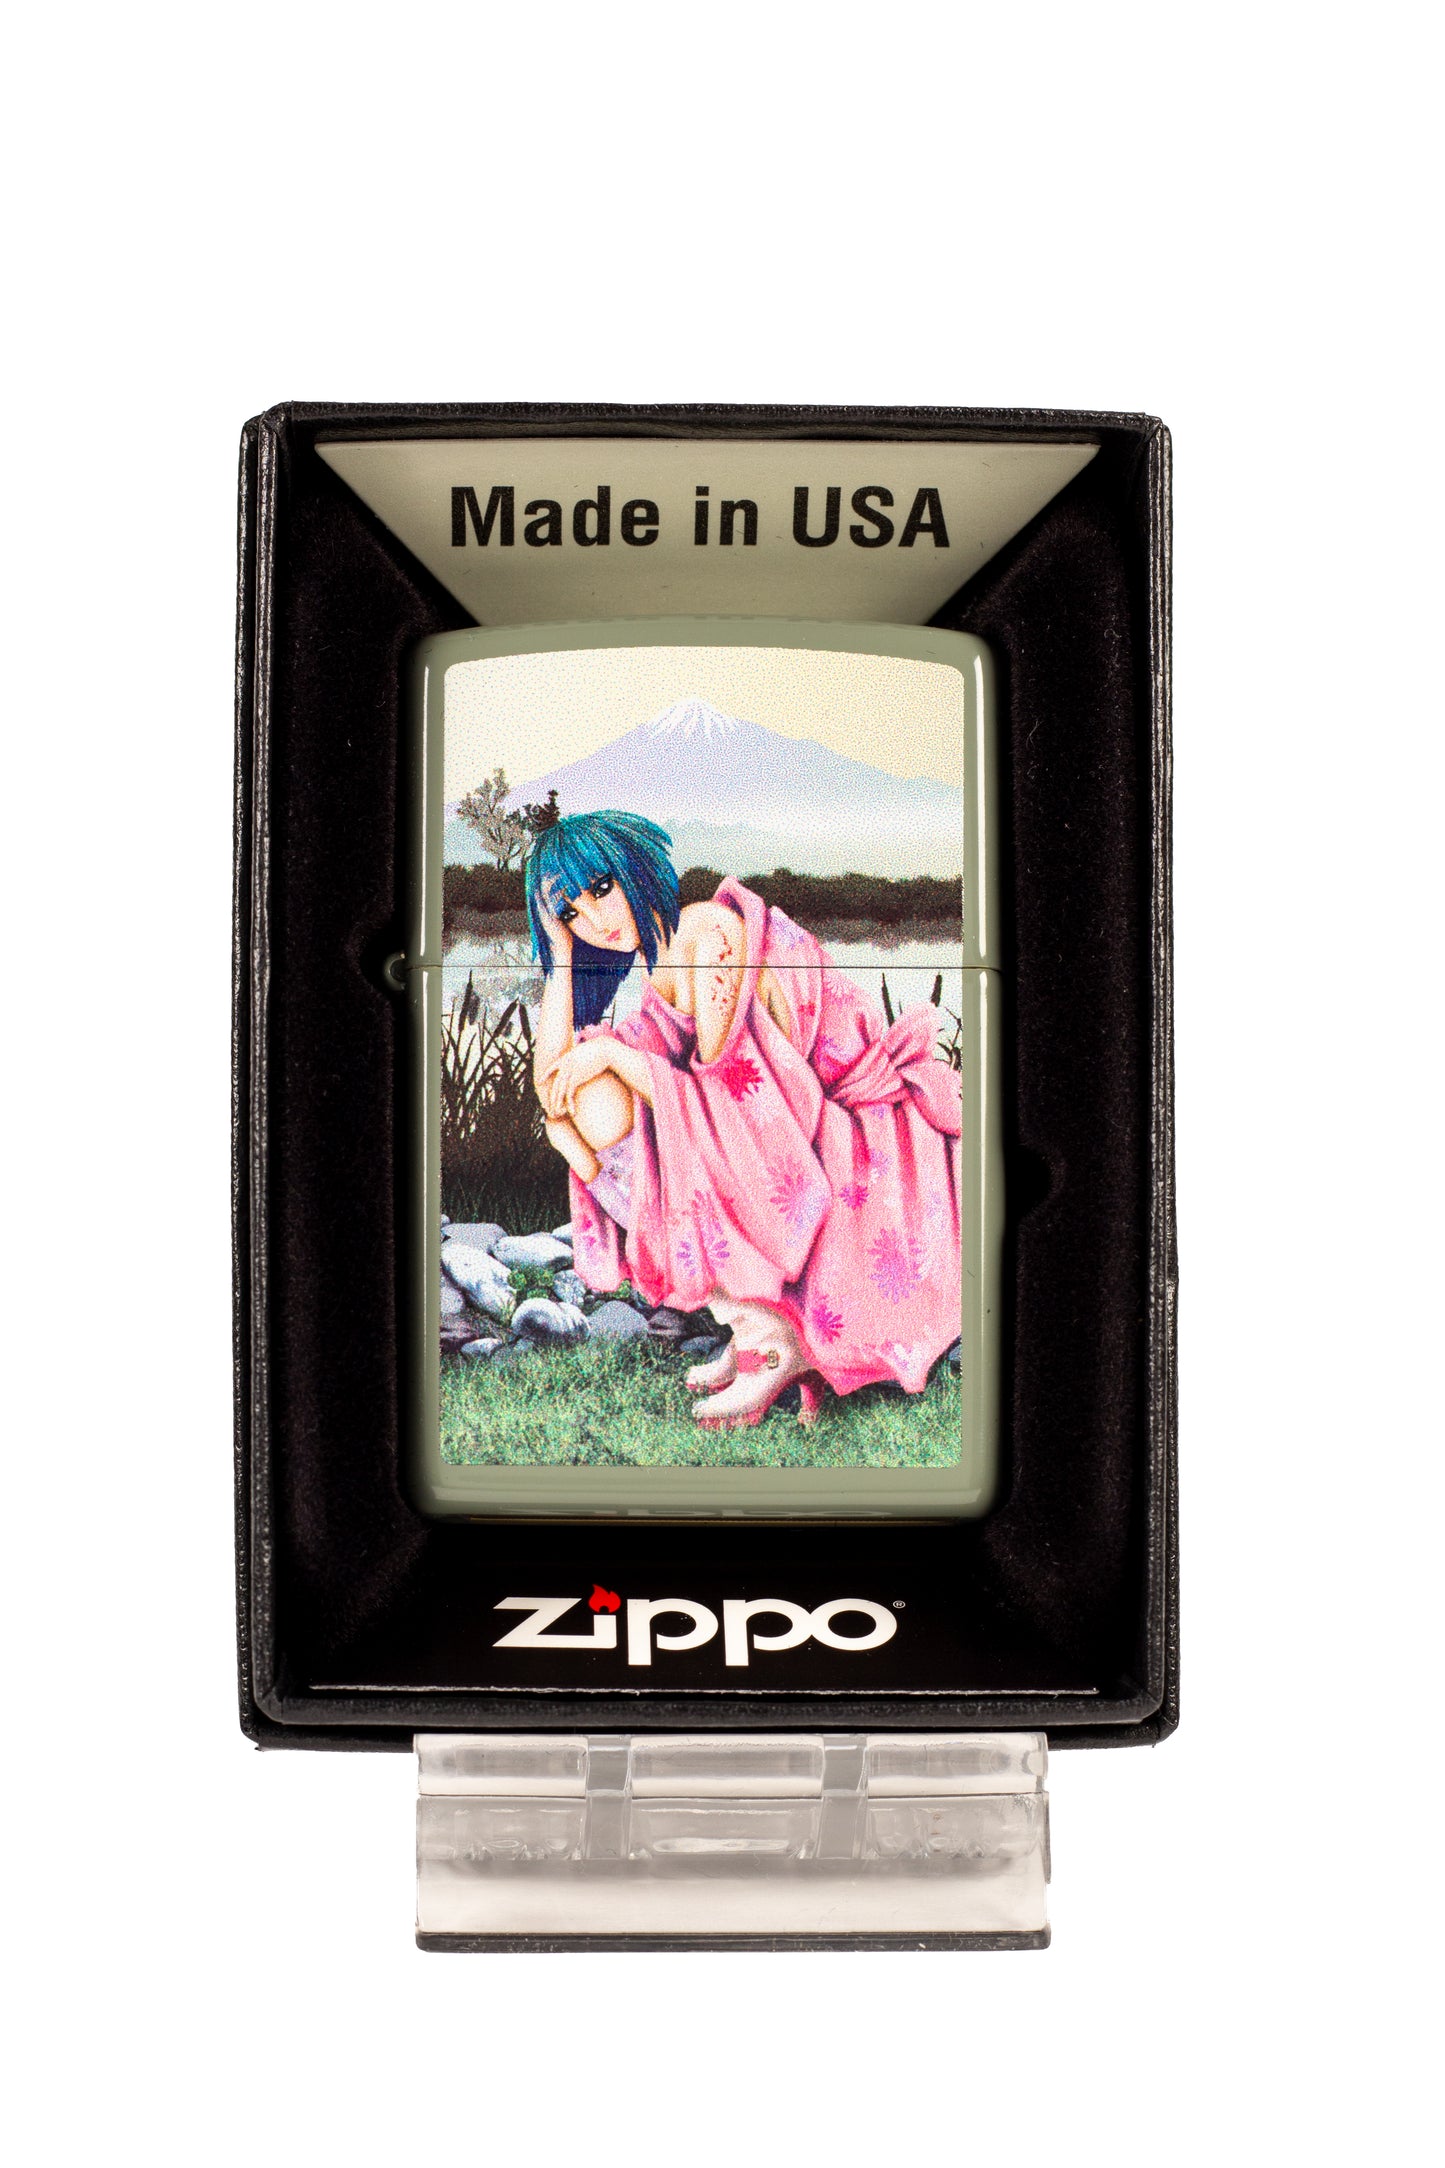 Anime Girl in Boots Crouched and Mountain Scene - Classic Sage Zippo Lighter